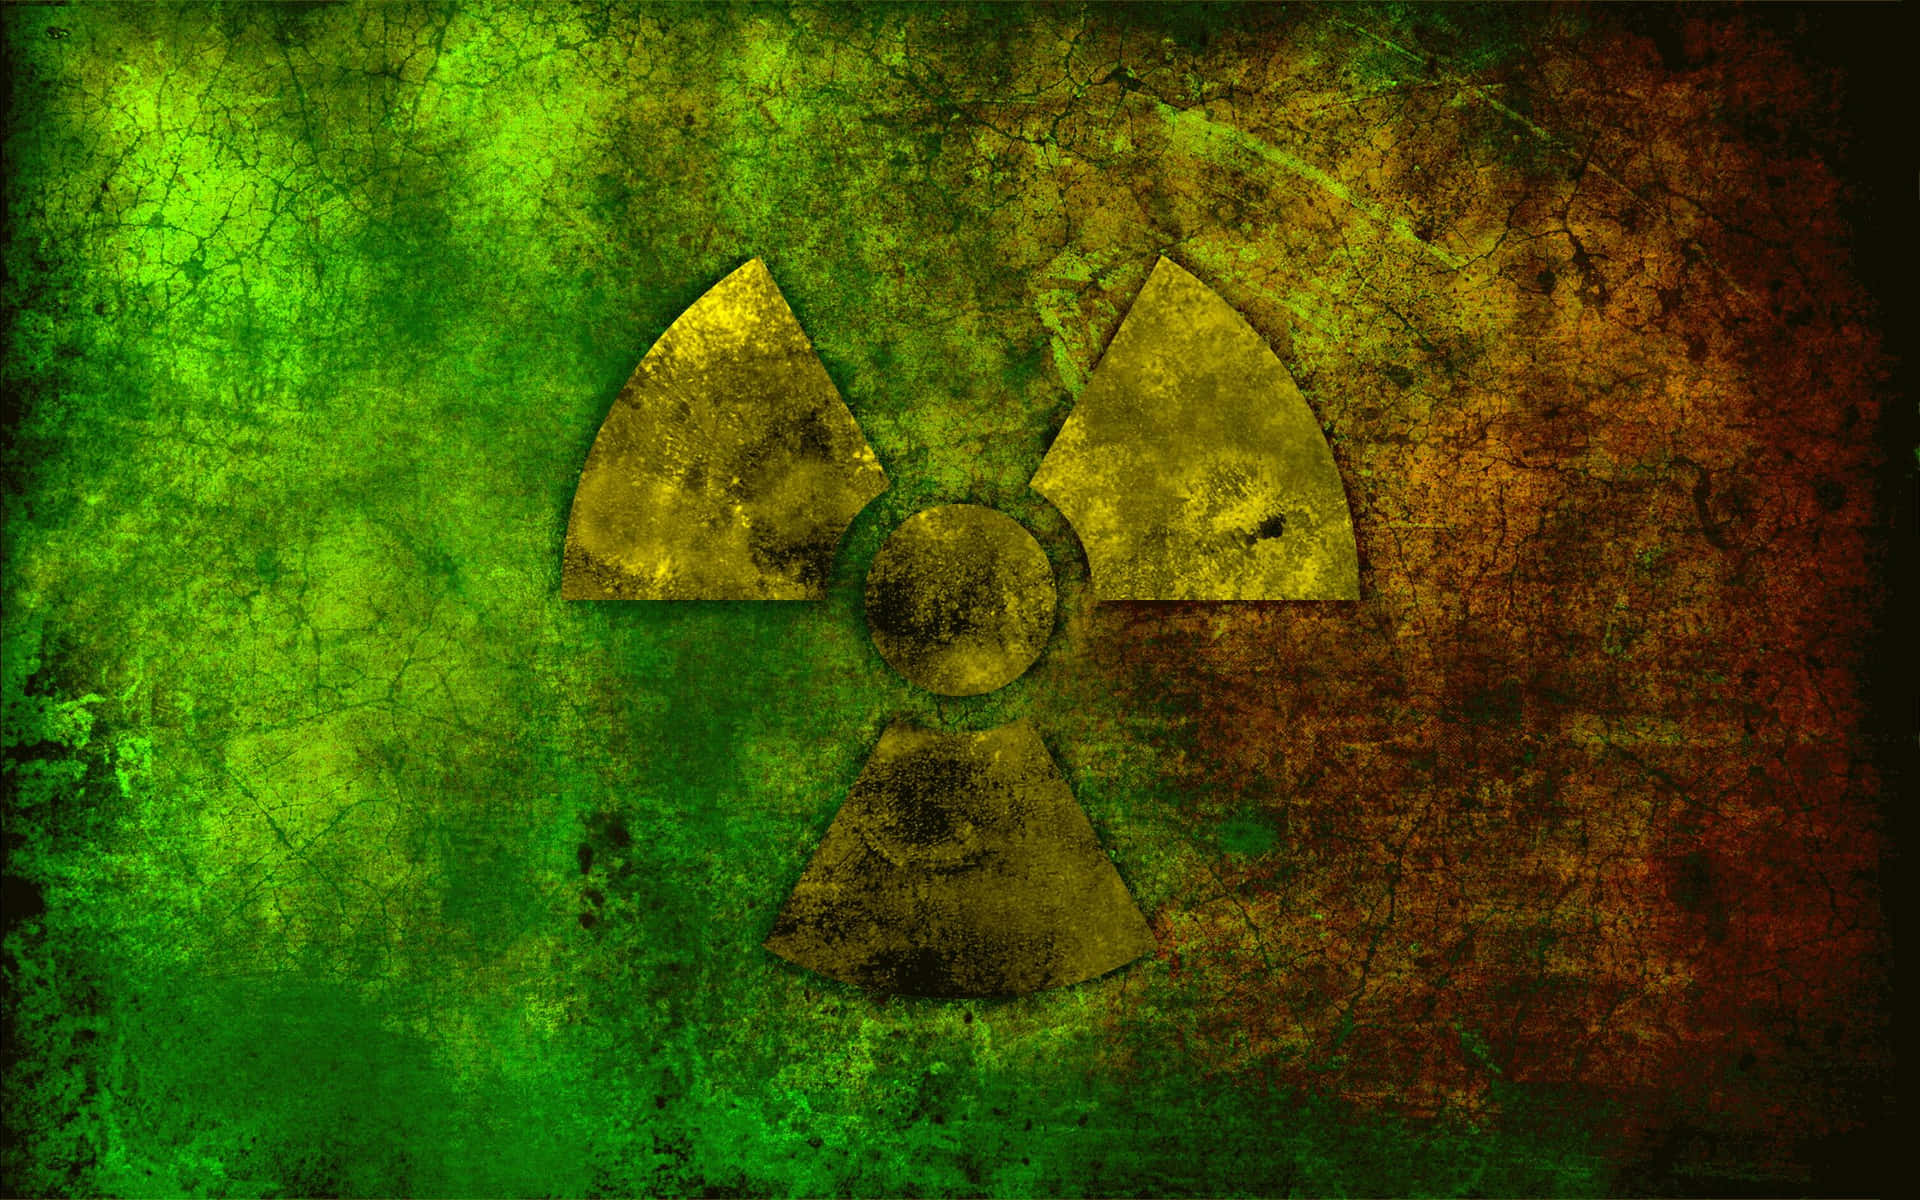 A Radioactive Symbol On A Green And Brown Background